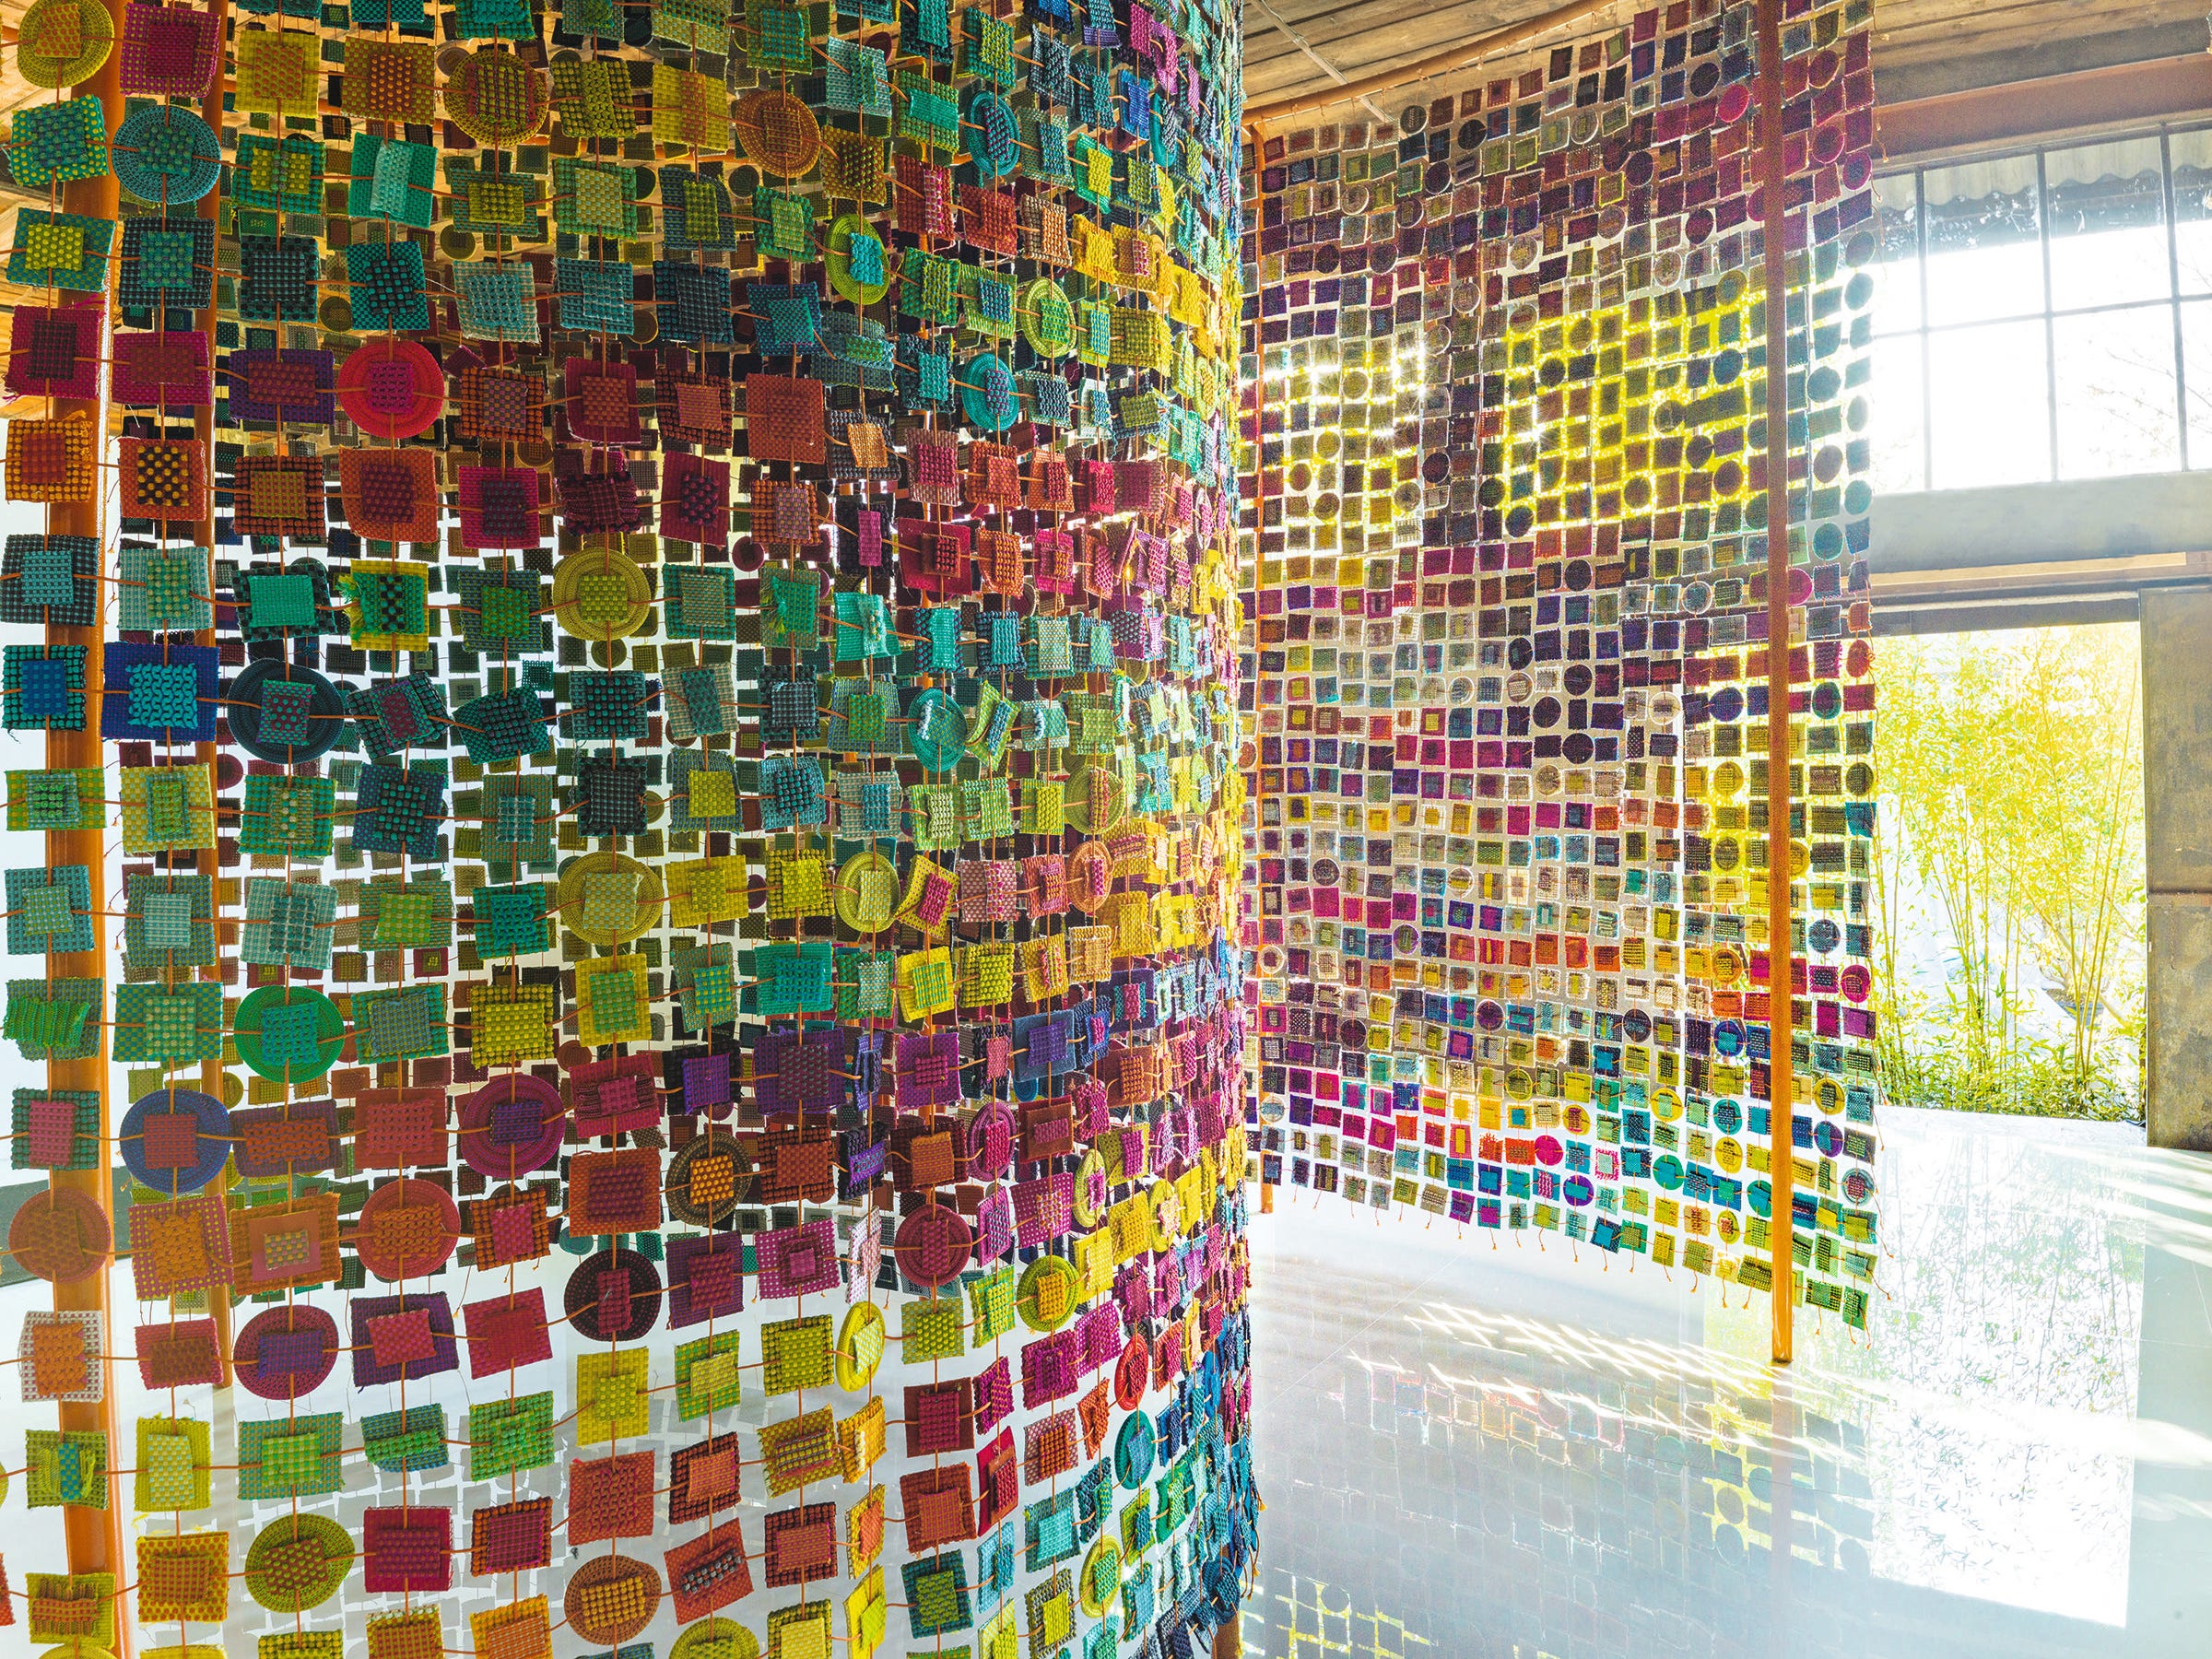 Master textile artist Paola Lenti created this extraordinary room divider out of small samples of her fabrics with stitchery showing a range of her extensive color palette.